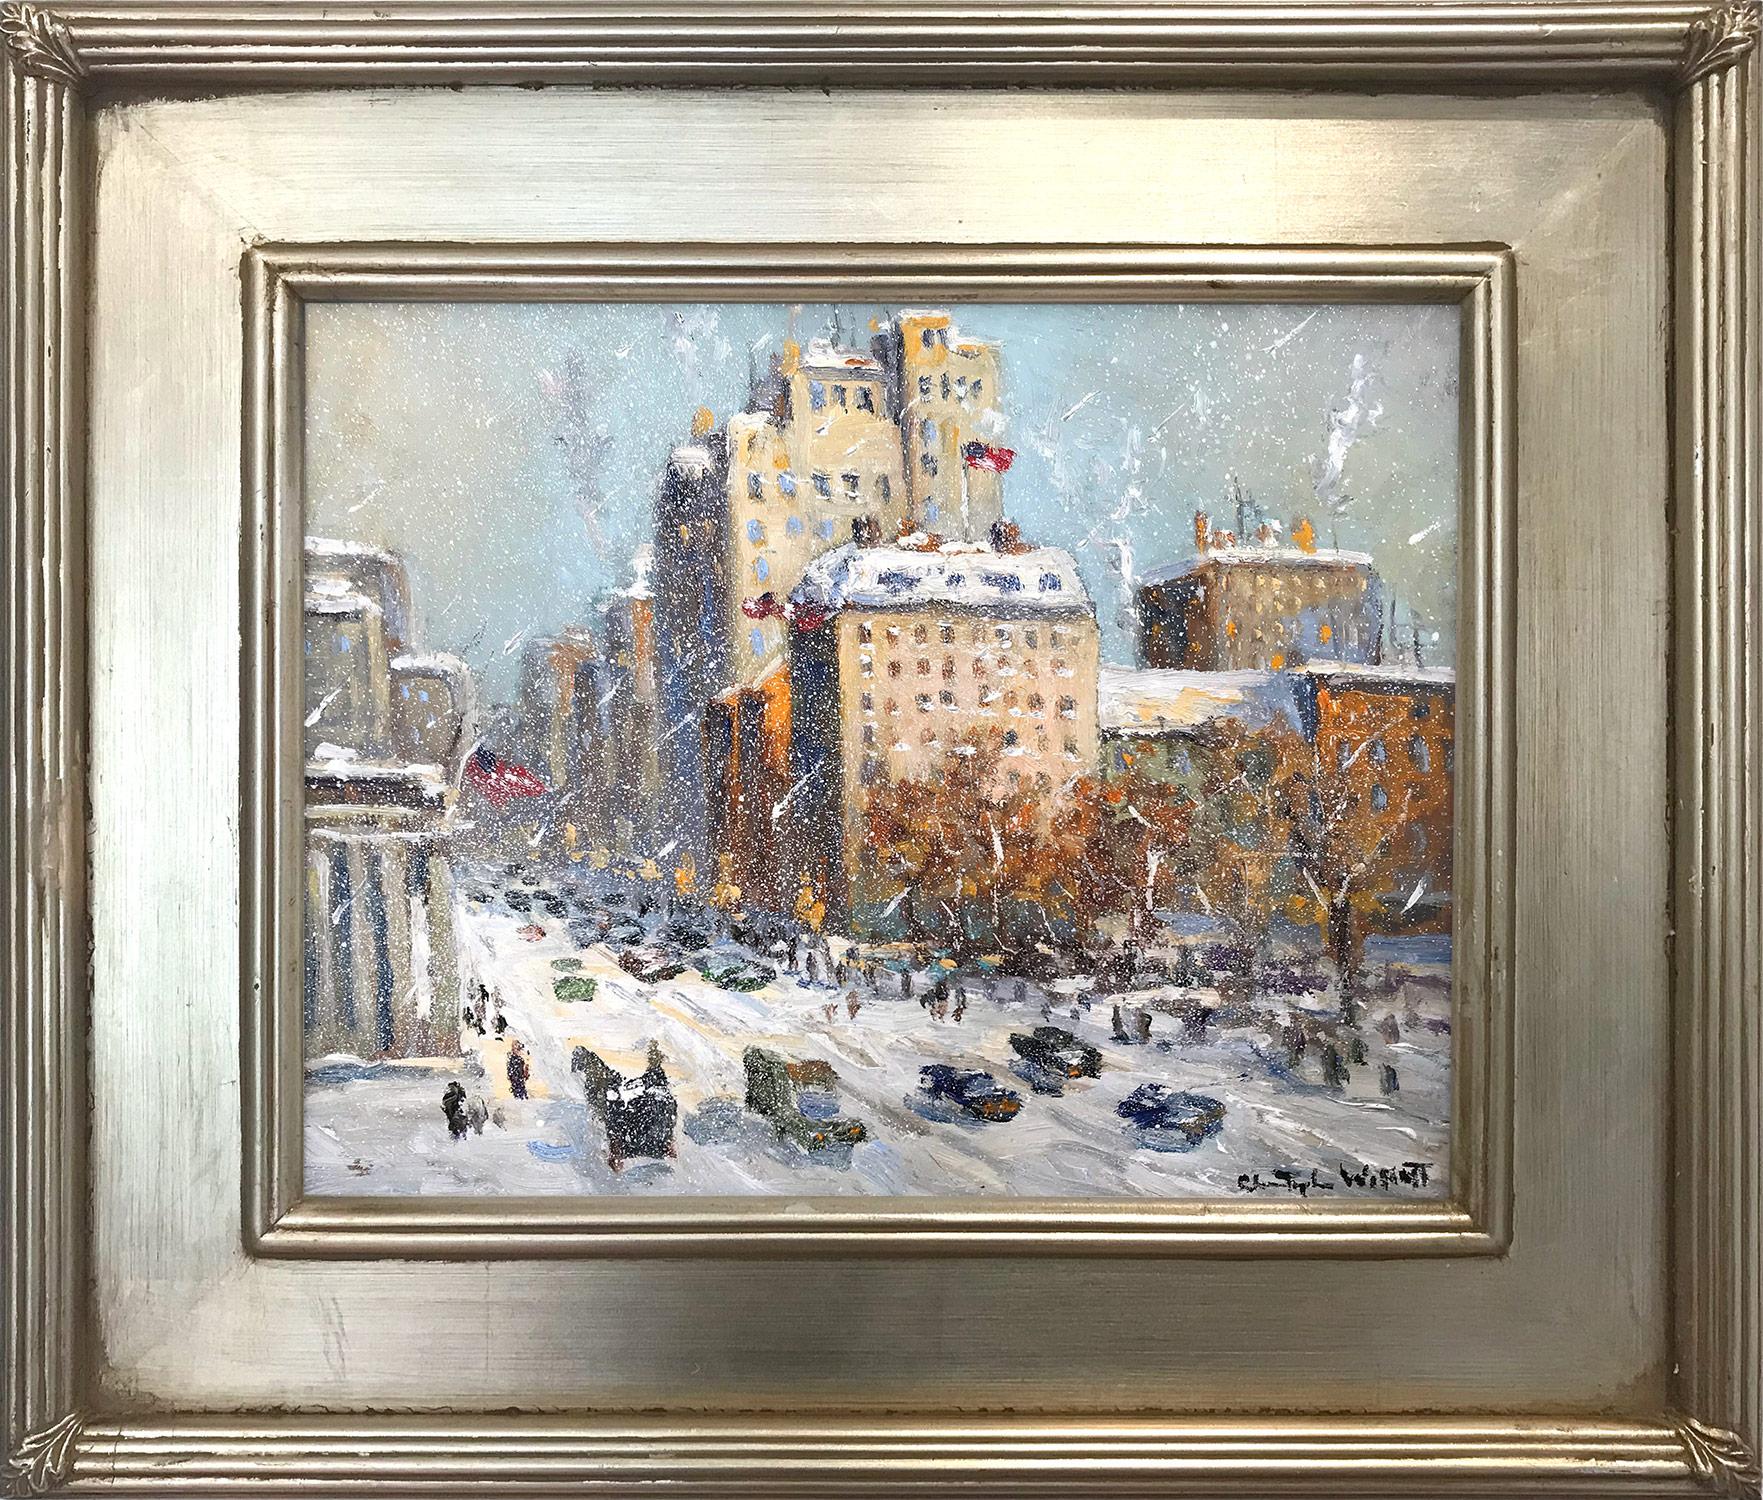 Christopher Willett Figurative Painting - "Bustling Winter in New York City" Impressionist Landscape Scene Oil Painting 